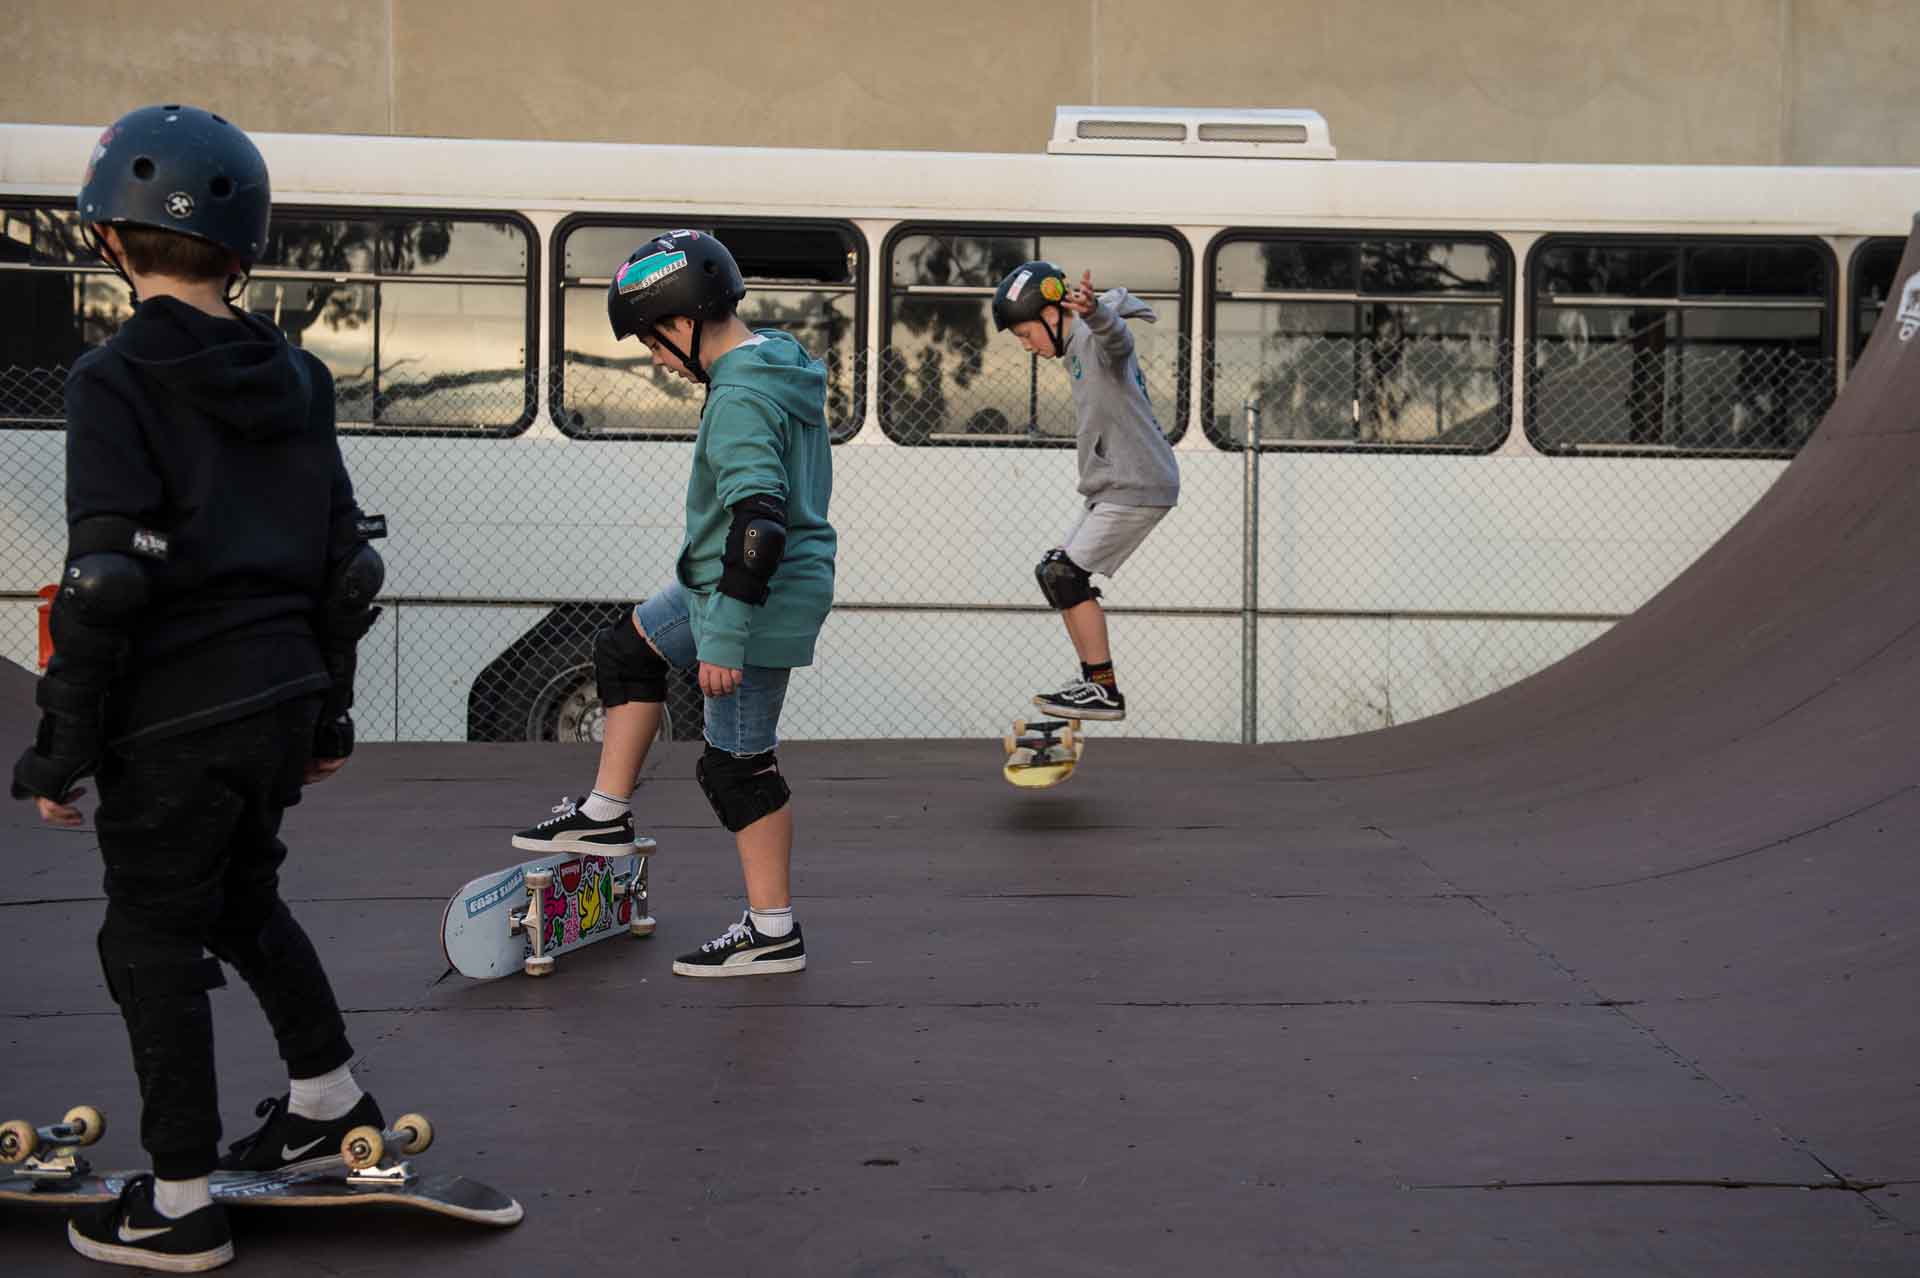 Skaters learn a "Primo Stand" on the outdoor halfpipe at Rampfest Indoor Skatepark